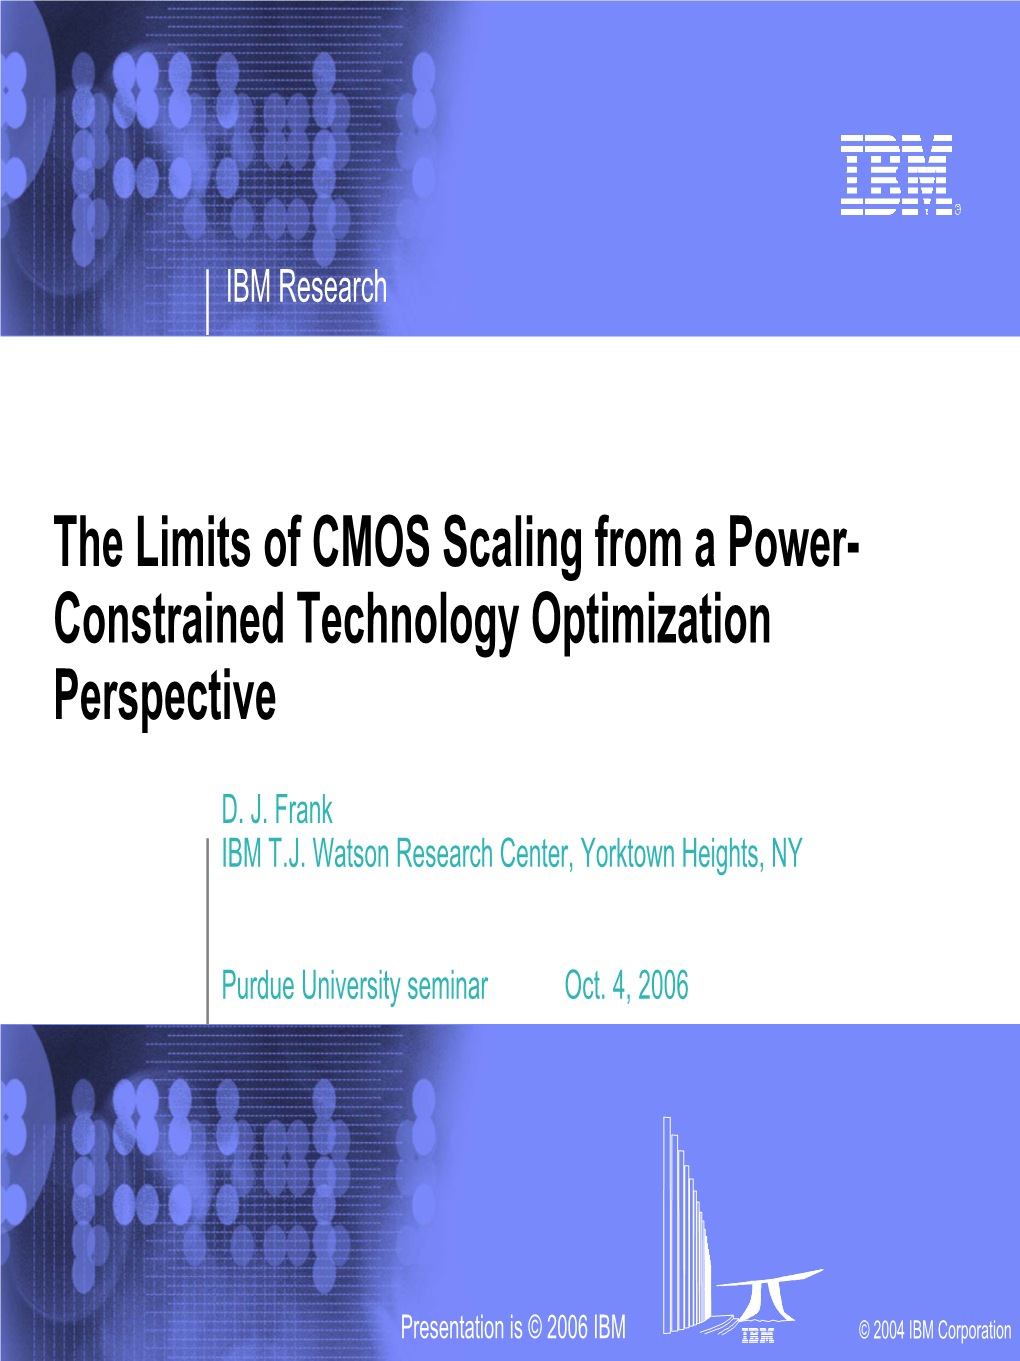 The Limits of CMOS Scaling from a Power- Constrained Technology Optimization Perspective